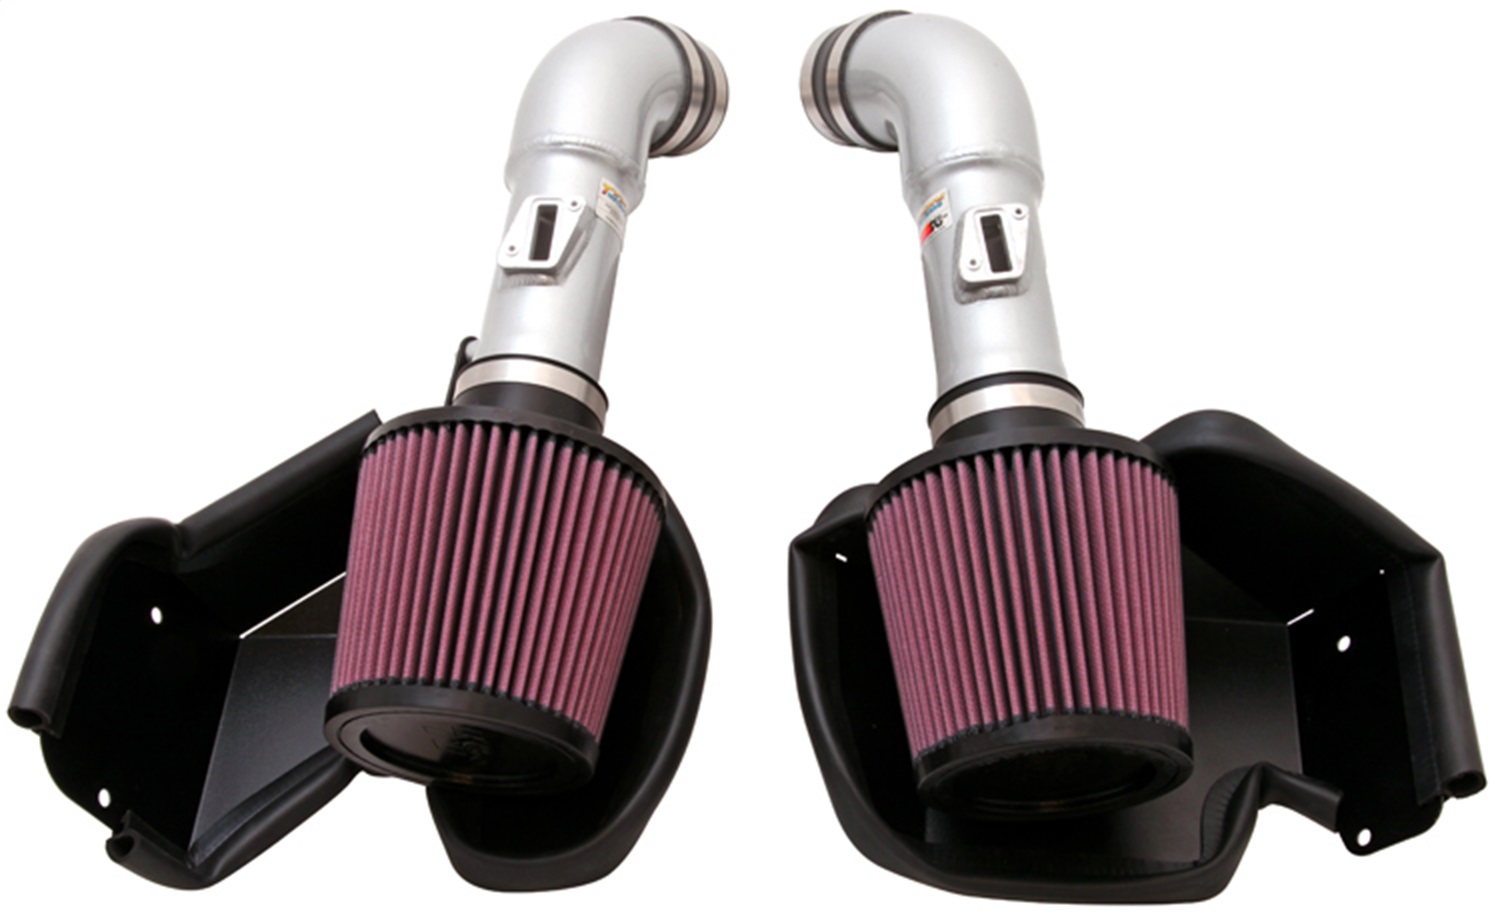 K&N Filters K&N Filters 69-7078TS Typhoon; Cold Air Intake Filter Assembly Fits 370Z G37